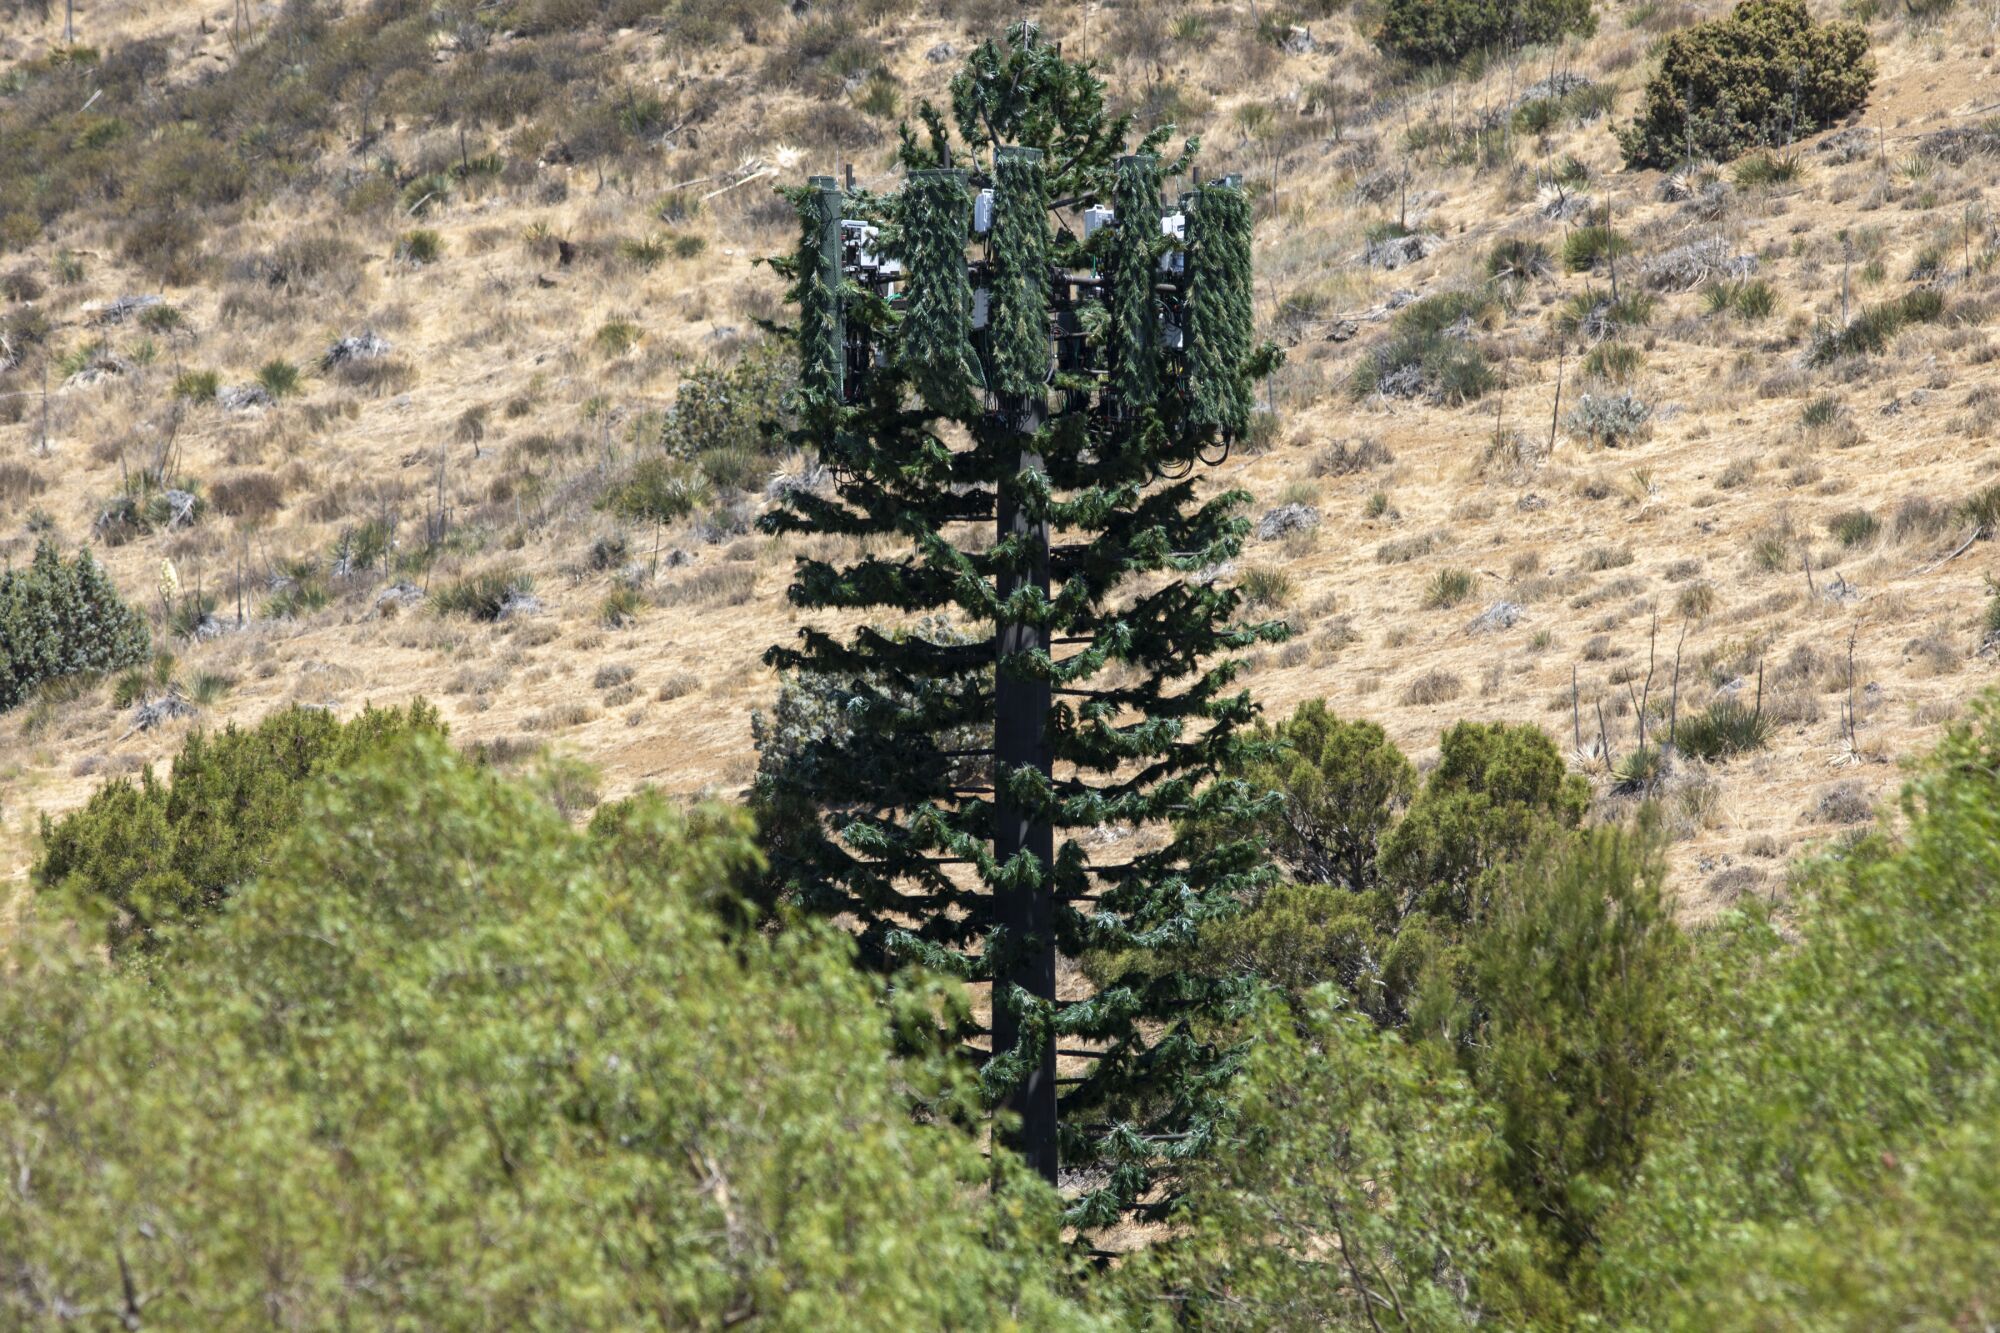 An image of a pine tree cell tower standing above its real brethren.